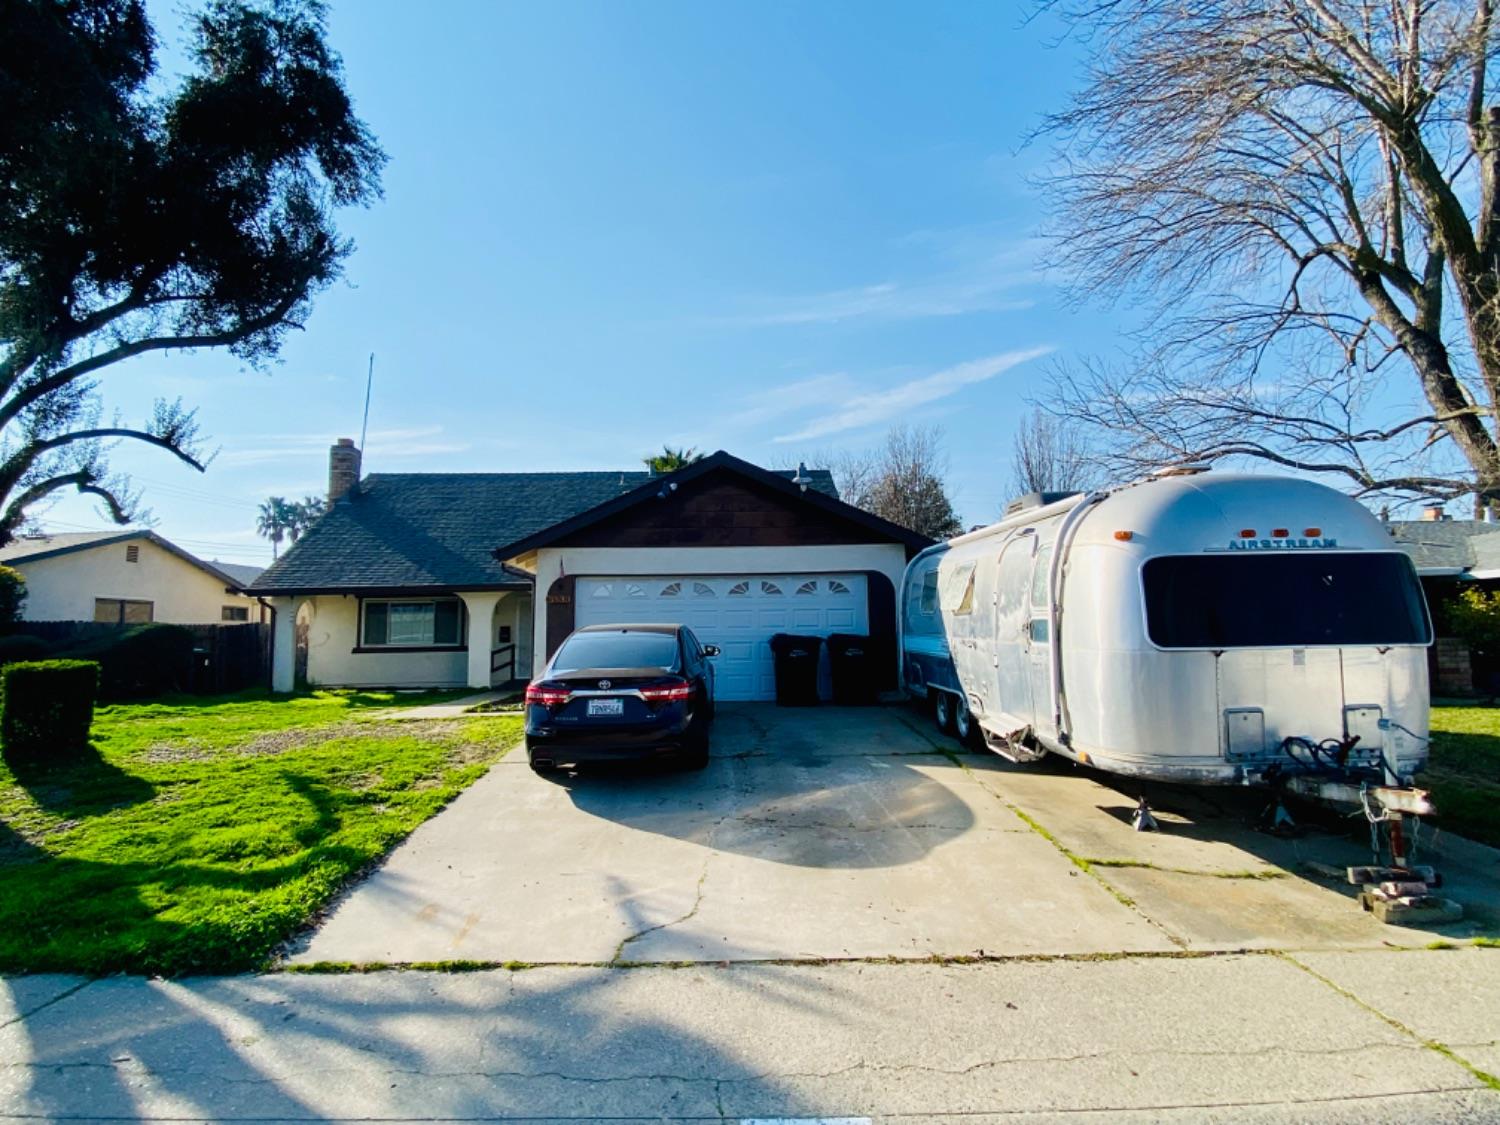 Check out this amazing Rosemont Fixer opportunity! With 4 possibly 5 bedrooms, over 1900 square feet